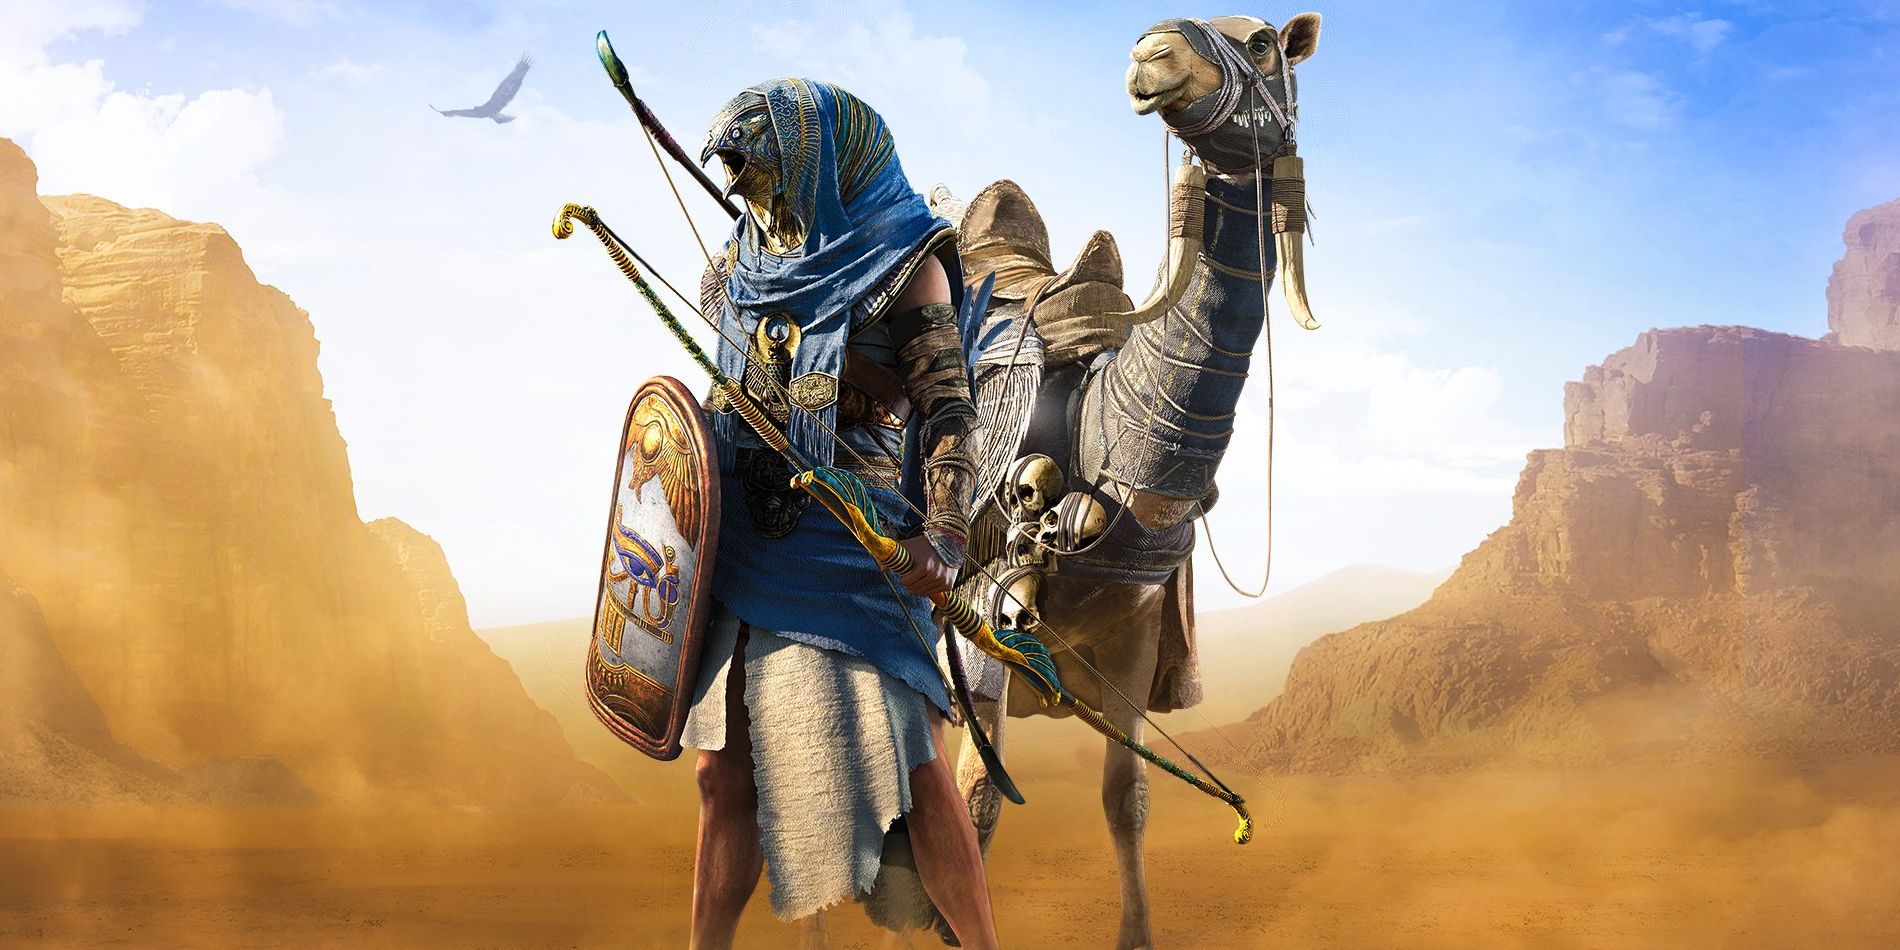 Assassin s Creed Every Known Isu In The Series Mythology Egypt Horus